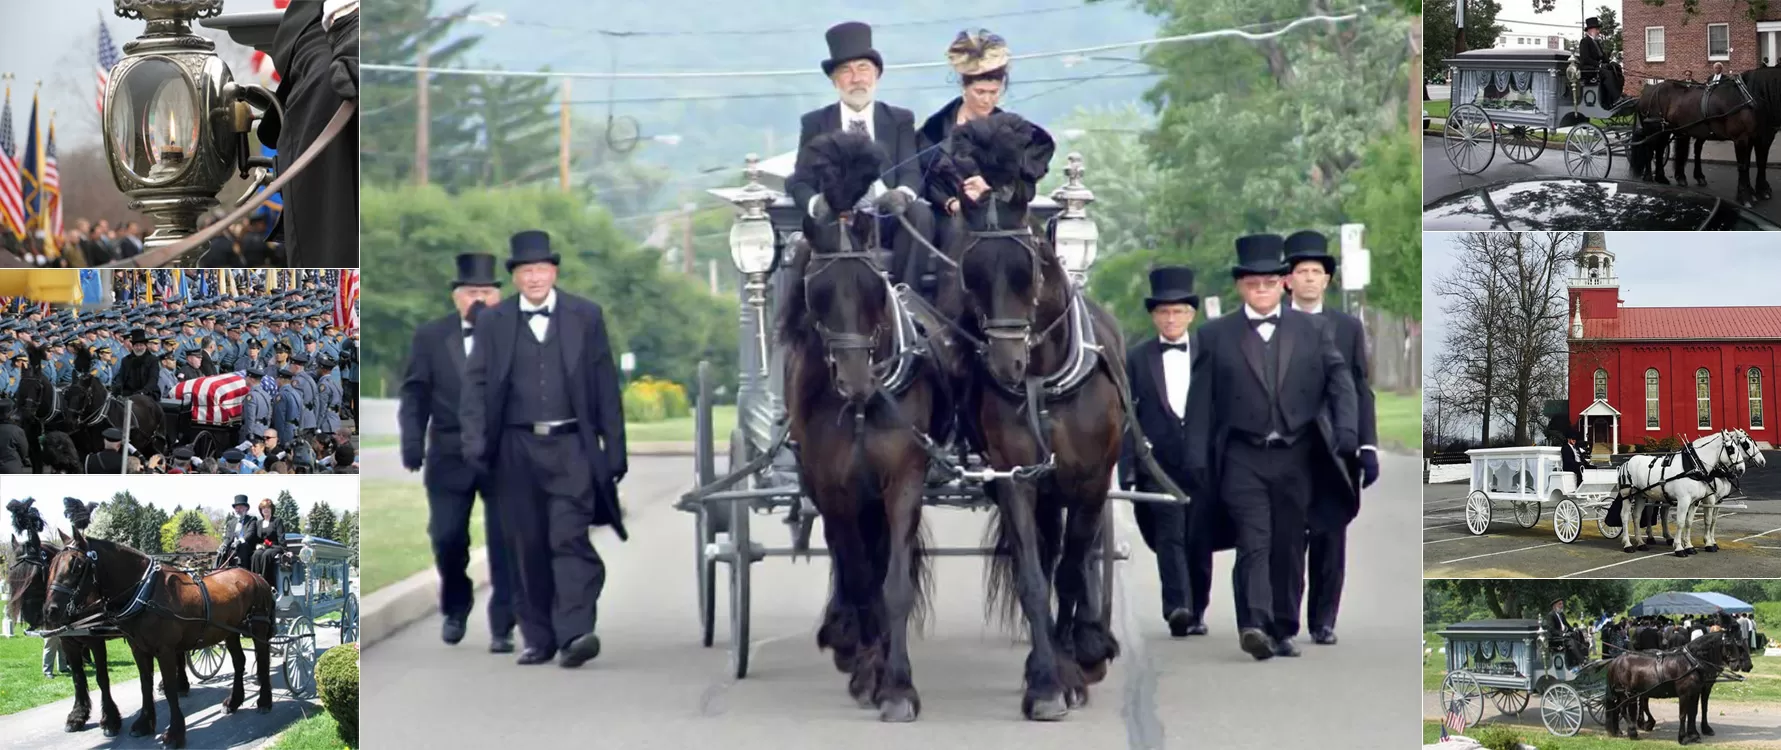 Horses pulling a funeral carriage